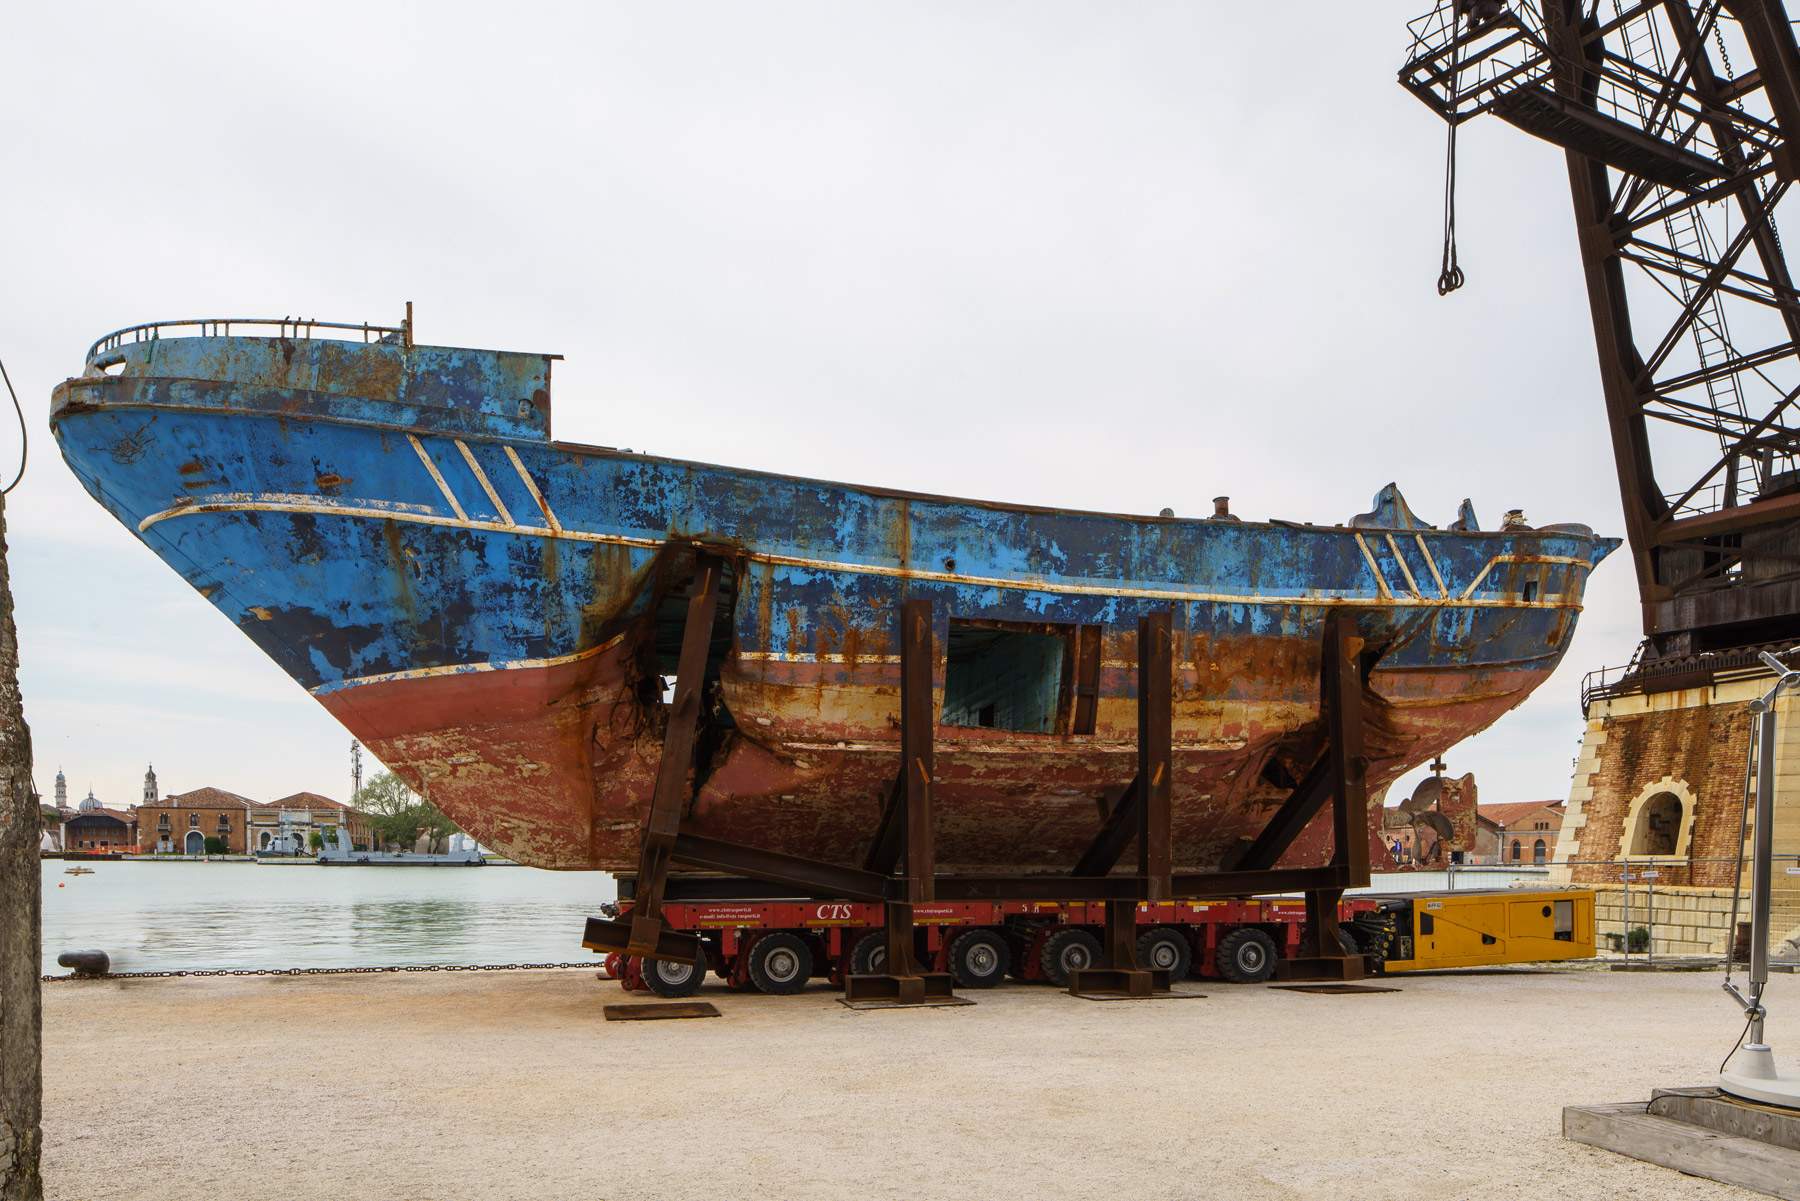 Wreck of migrant shipwreck returns to Sicily exhibited at 2019 Venice Biennale